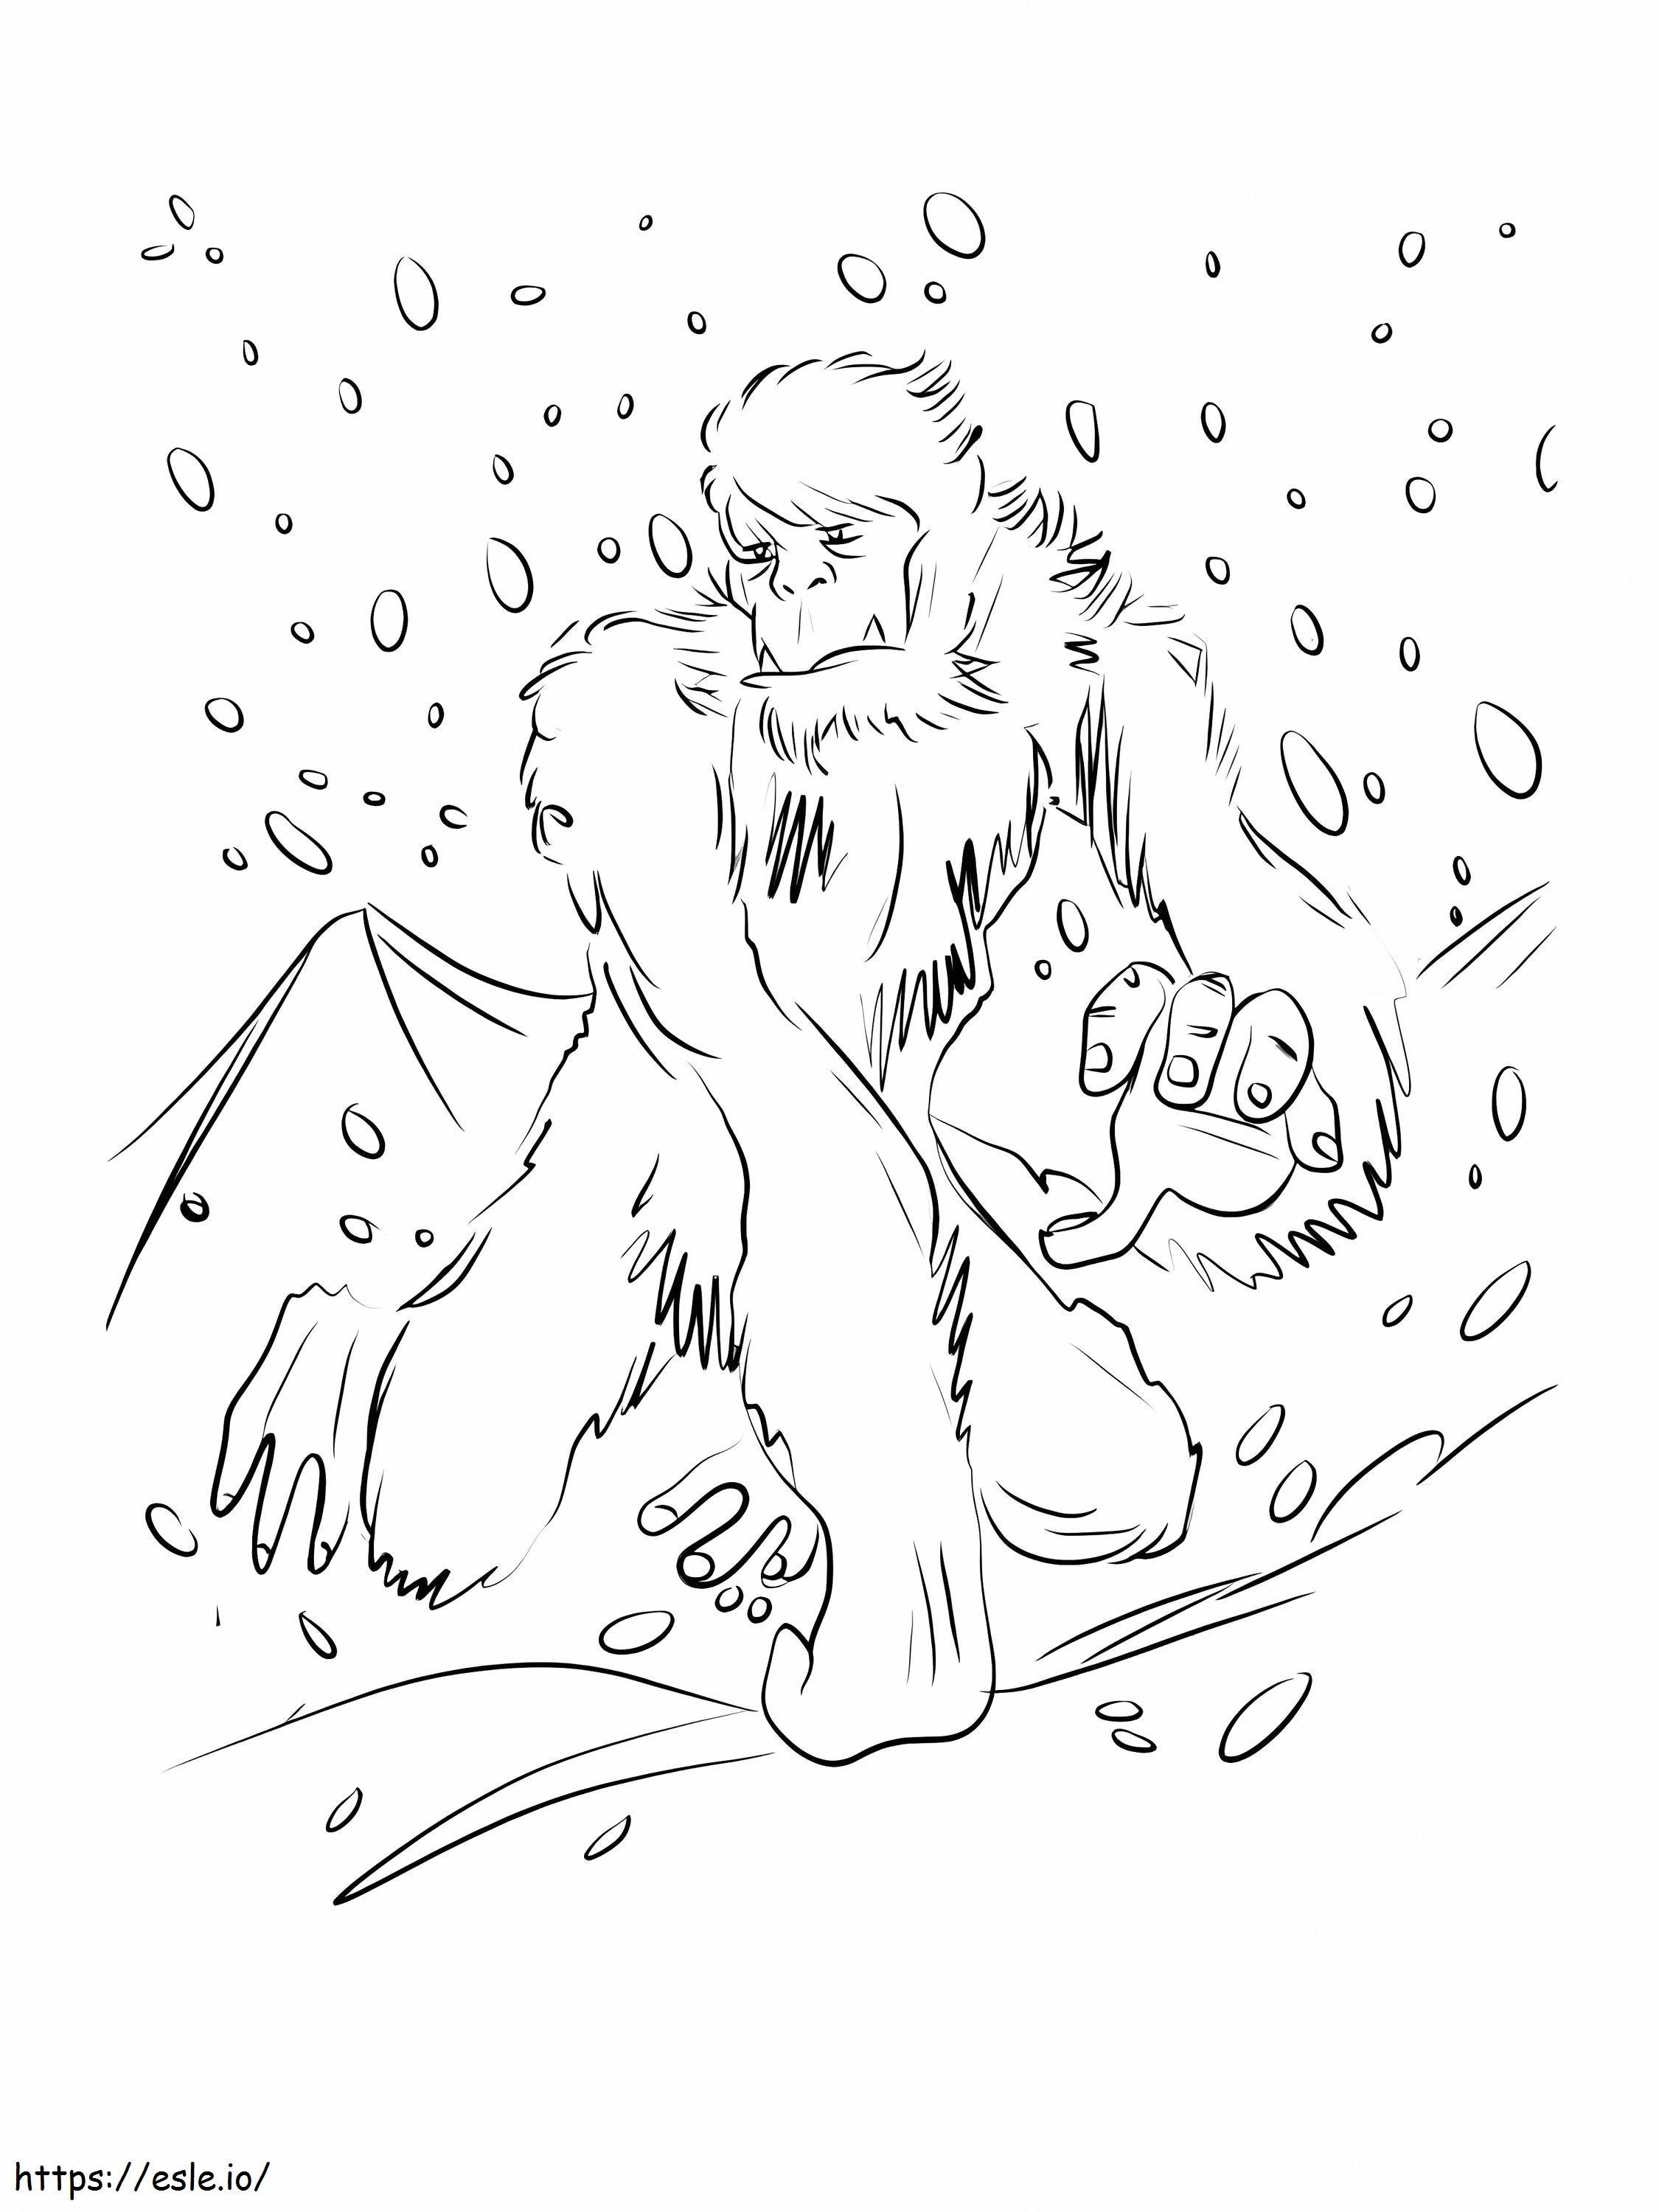 Bigfoot Misterioso coloring page